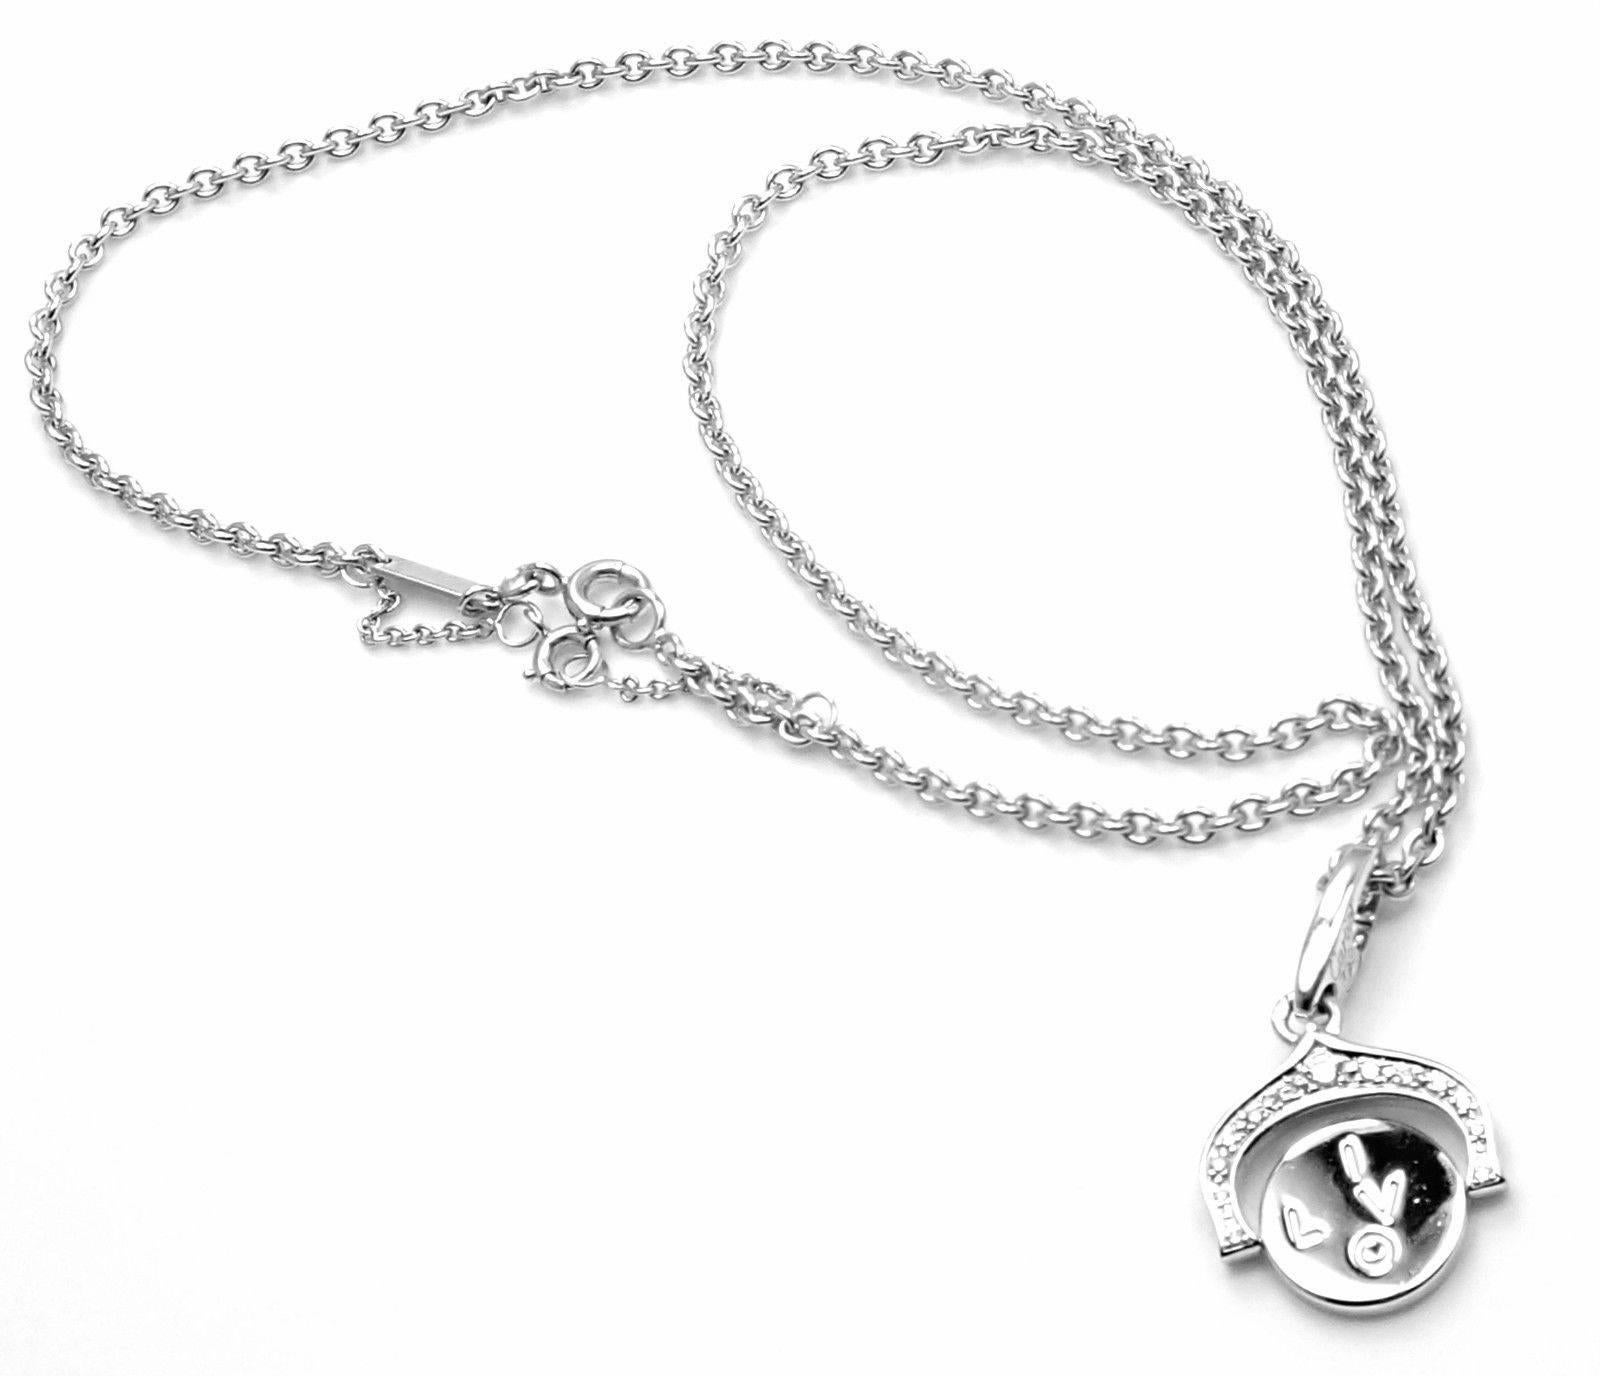 18k White Gold Diamond I Love You Charm Pendant Necklace by Cartier. 
With 13 round brilliant cut diamonds VVS1 clarity, E color total weight approx. .12ct
This pendant comes with Cartier certificate.
Details: 
Measurements: Chain Length: 16.5